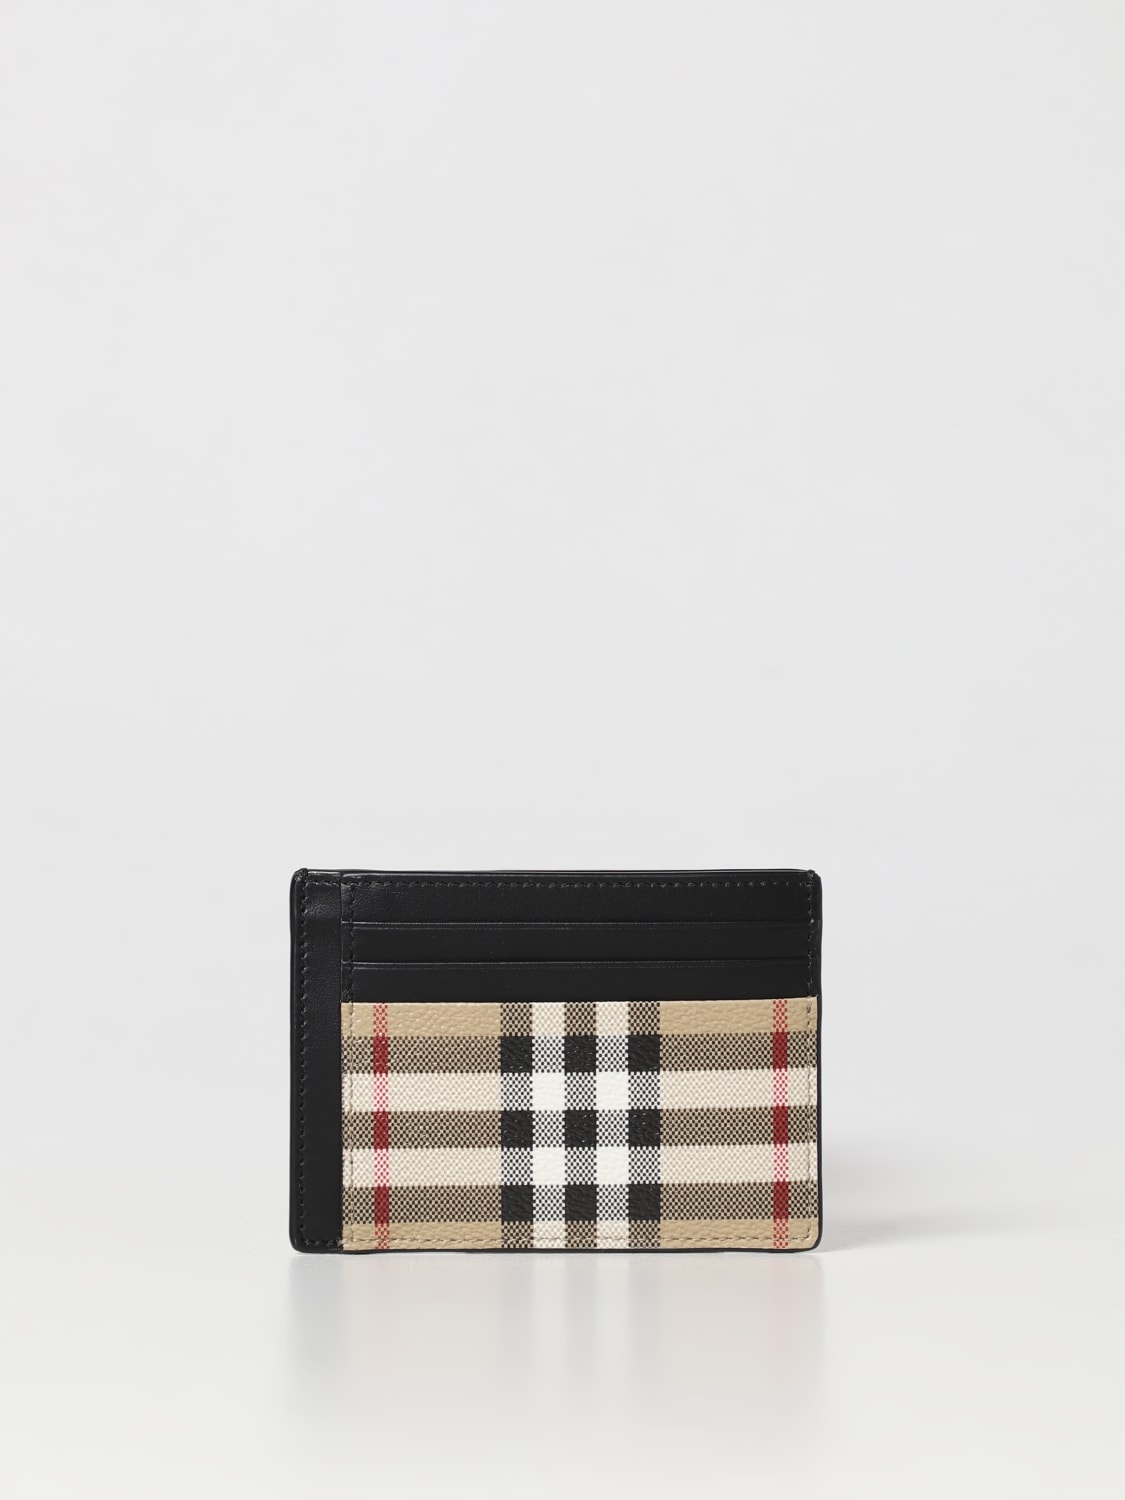 Fendi card holder in leather and coated canvas